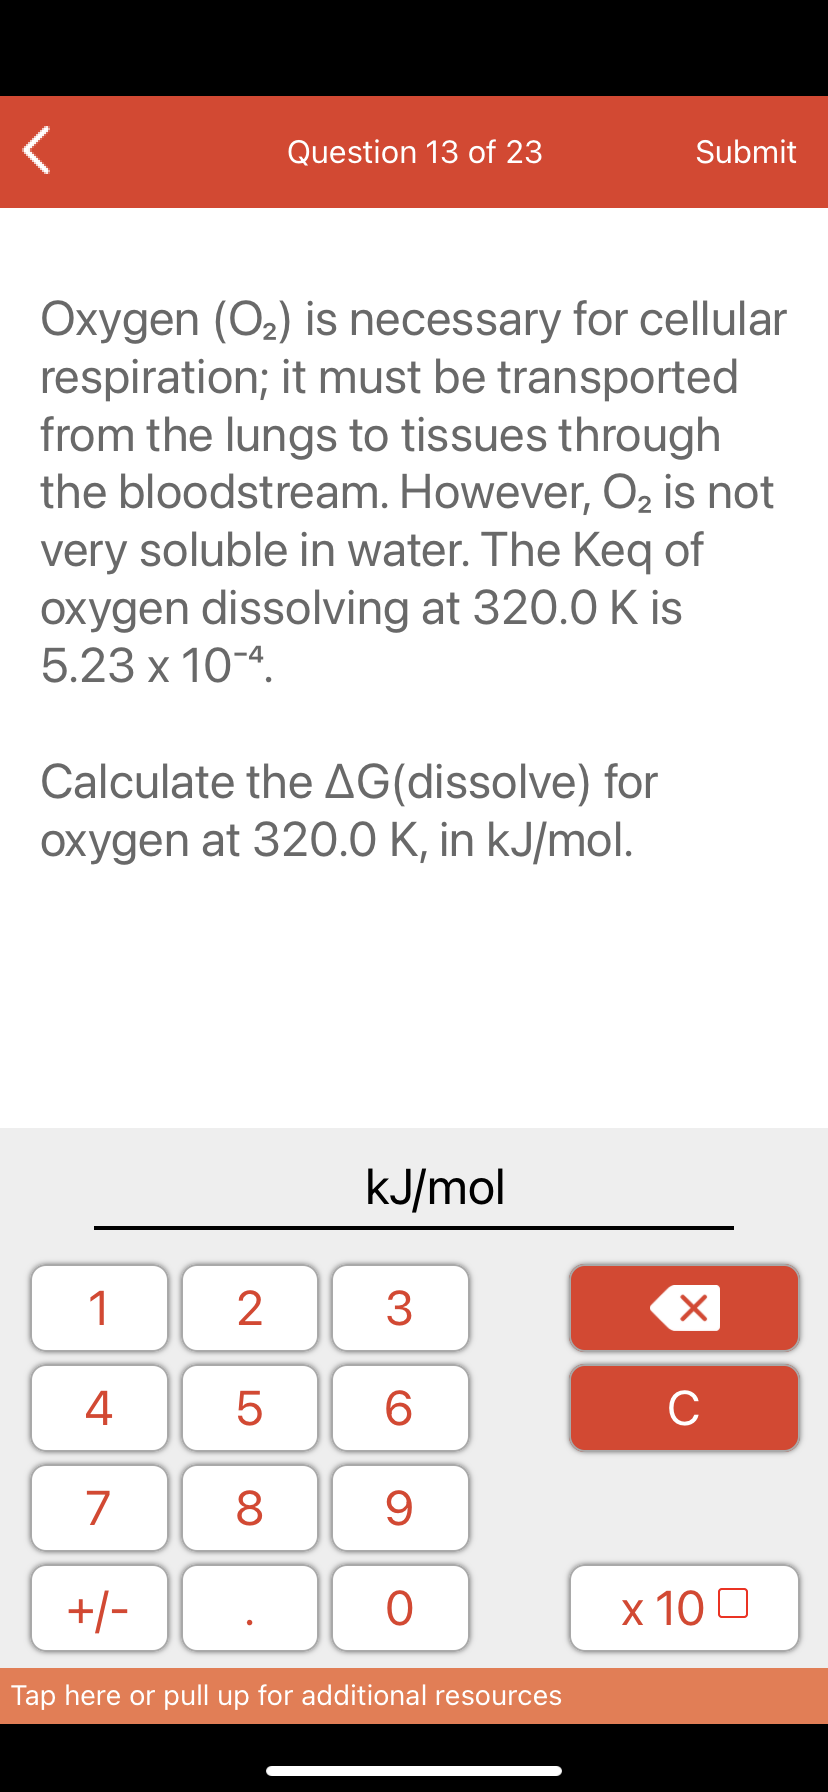 Question 13 of 23
Submit
Oxygen (O2) is necessary for cellular
respiration; it must be transported
from the lungs to tissues through
the bloodstream. However, O2 is not
very soluble in water. The Keq of
oxygen dissolving at 320.0 K is
5.23 x 10-4.
Calculate the AG(dissolve) for
oxygen at 320.0 K, in kJ/mol.
kJ/mol
1
4
6.
C
7
9
+/-
x 10 0
Tap here or pull up for additional resources
LO
00
